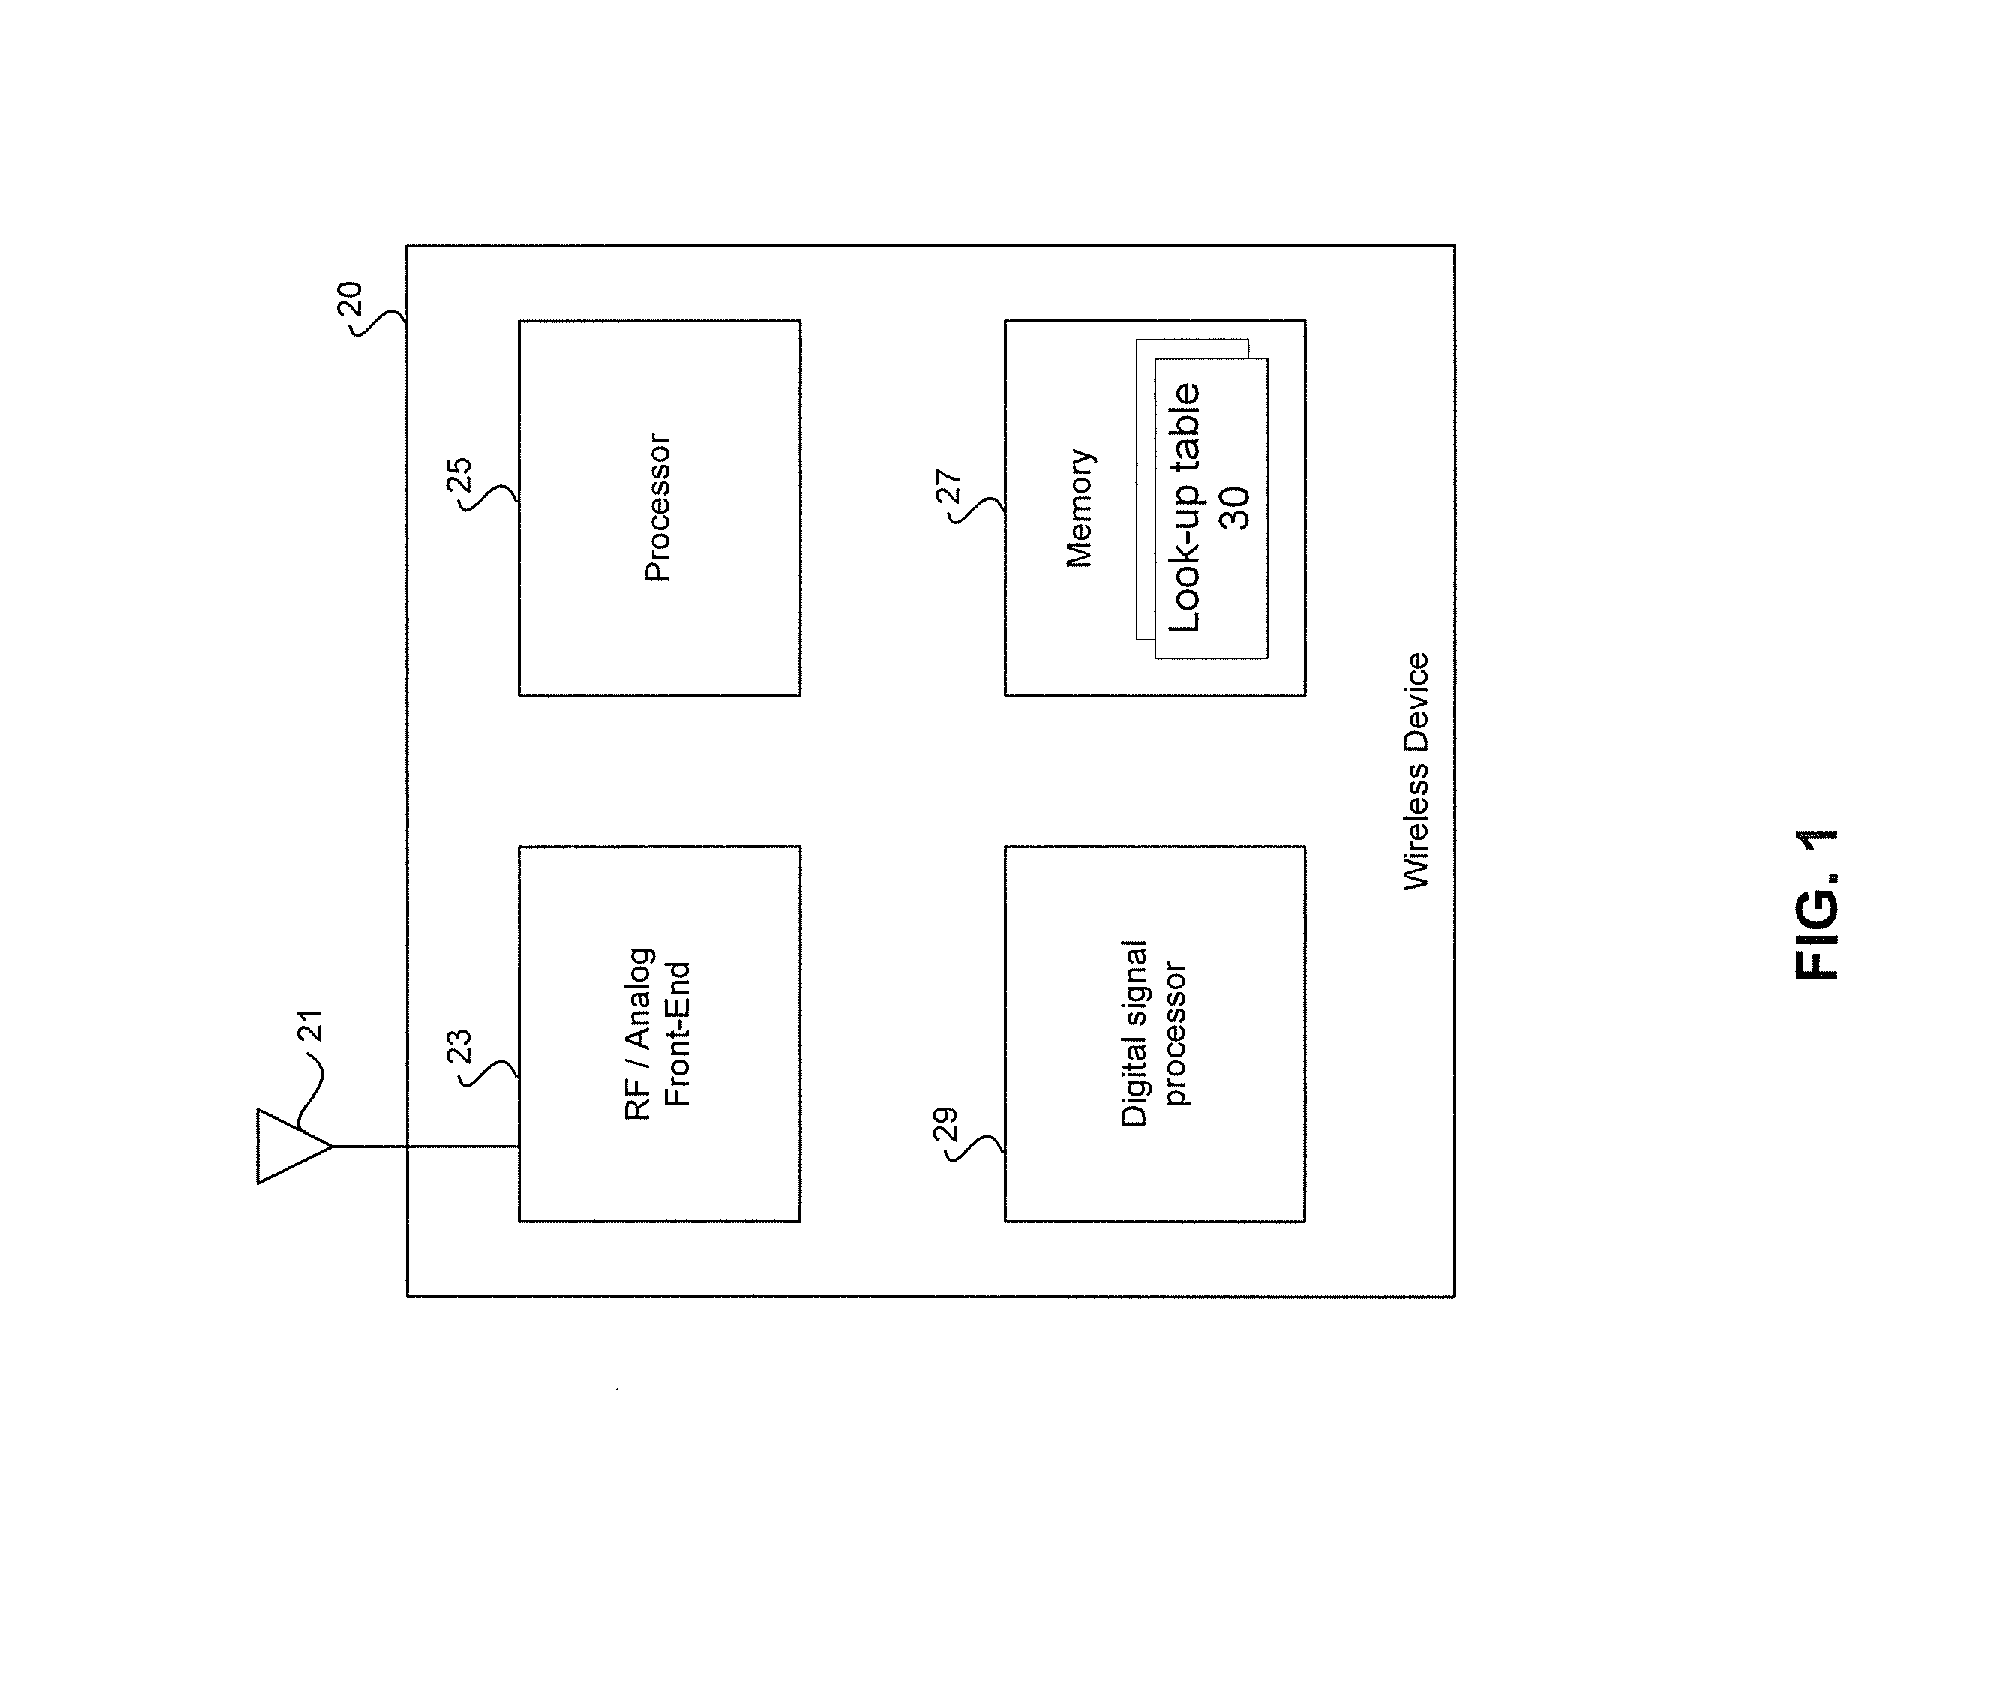 Method and system for blocker detecton and automatic gain control